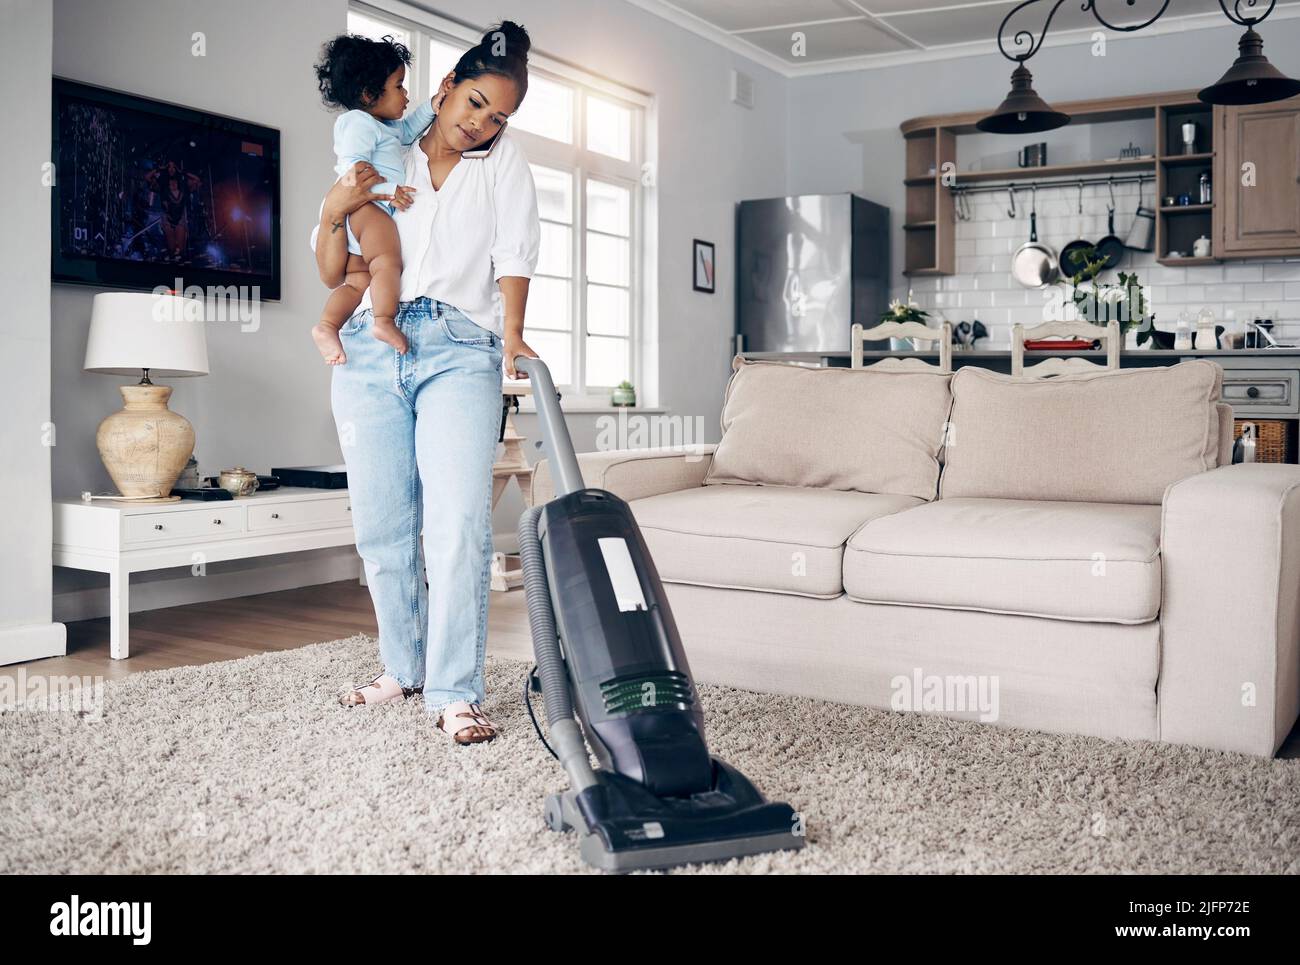 Her mind is skilfully in different places. Shot of a young mother using a cellphone while completing housework and holding her baby at home. Stock Photo